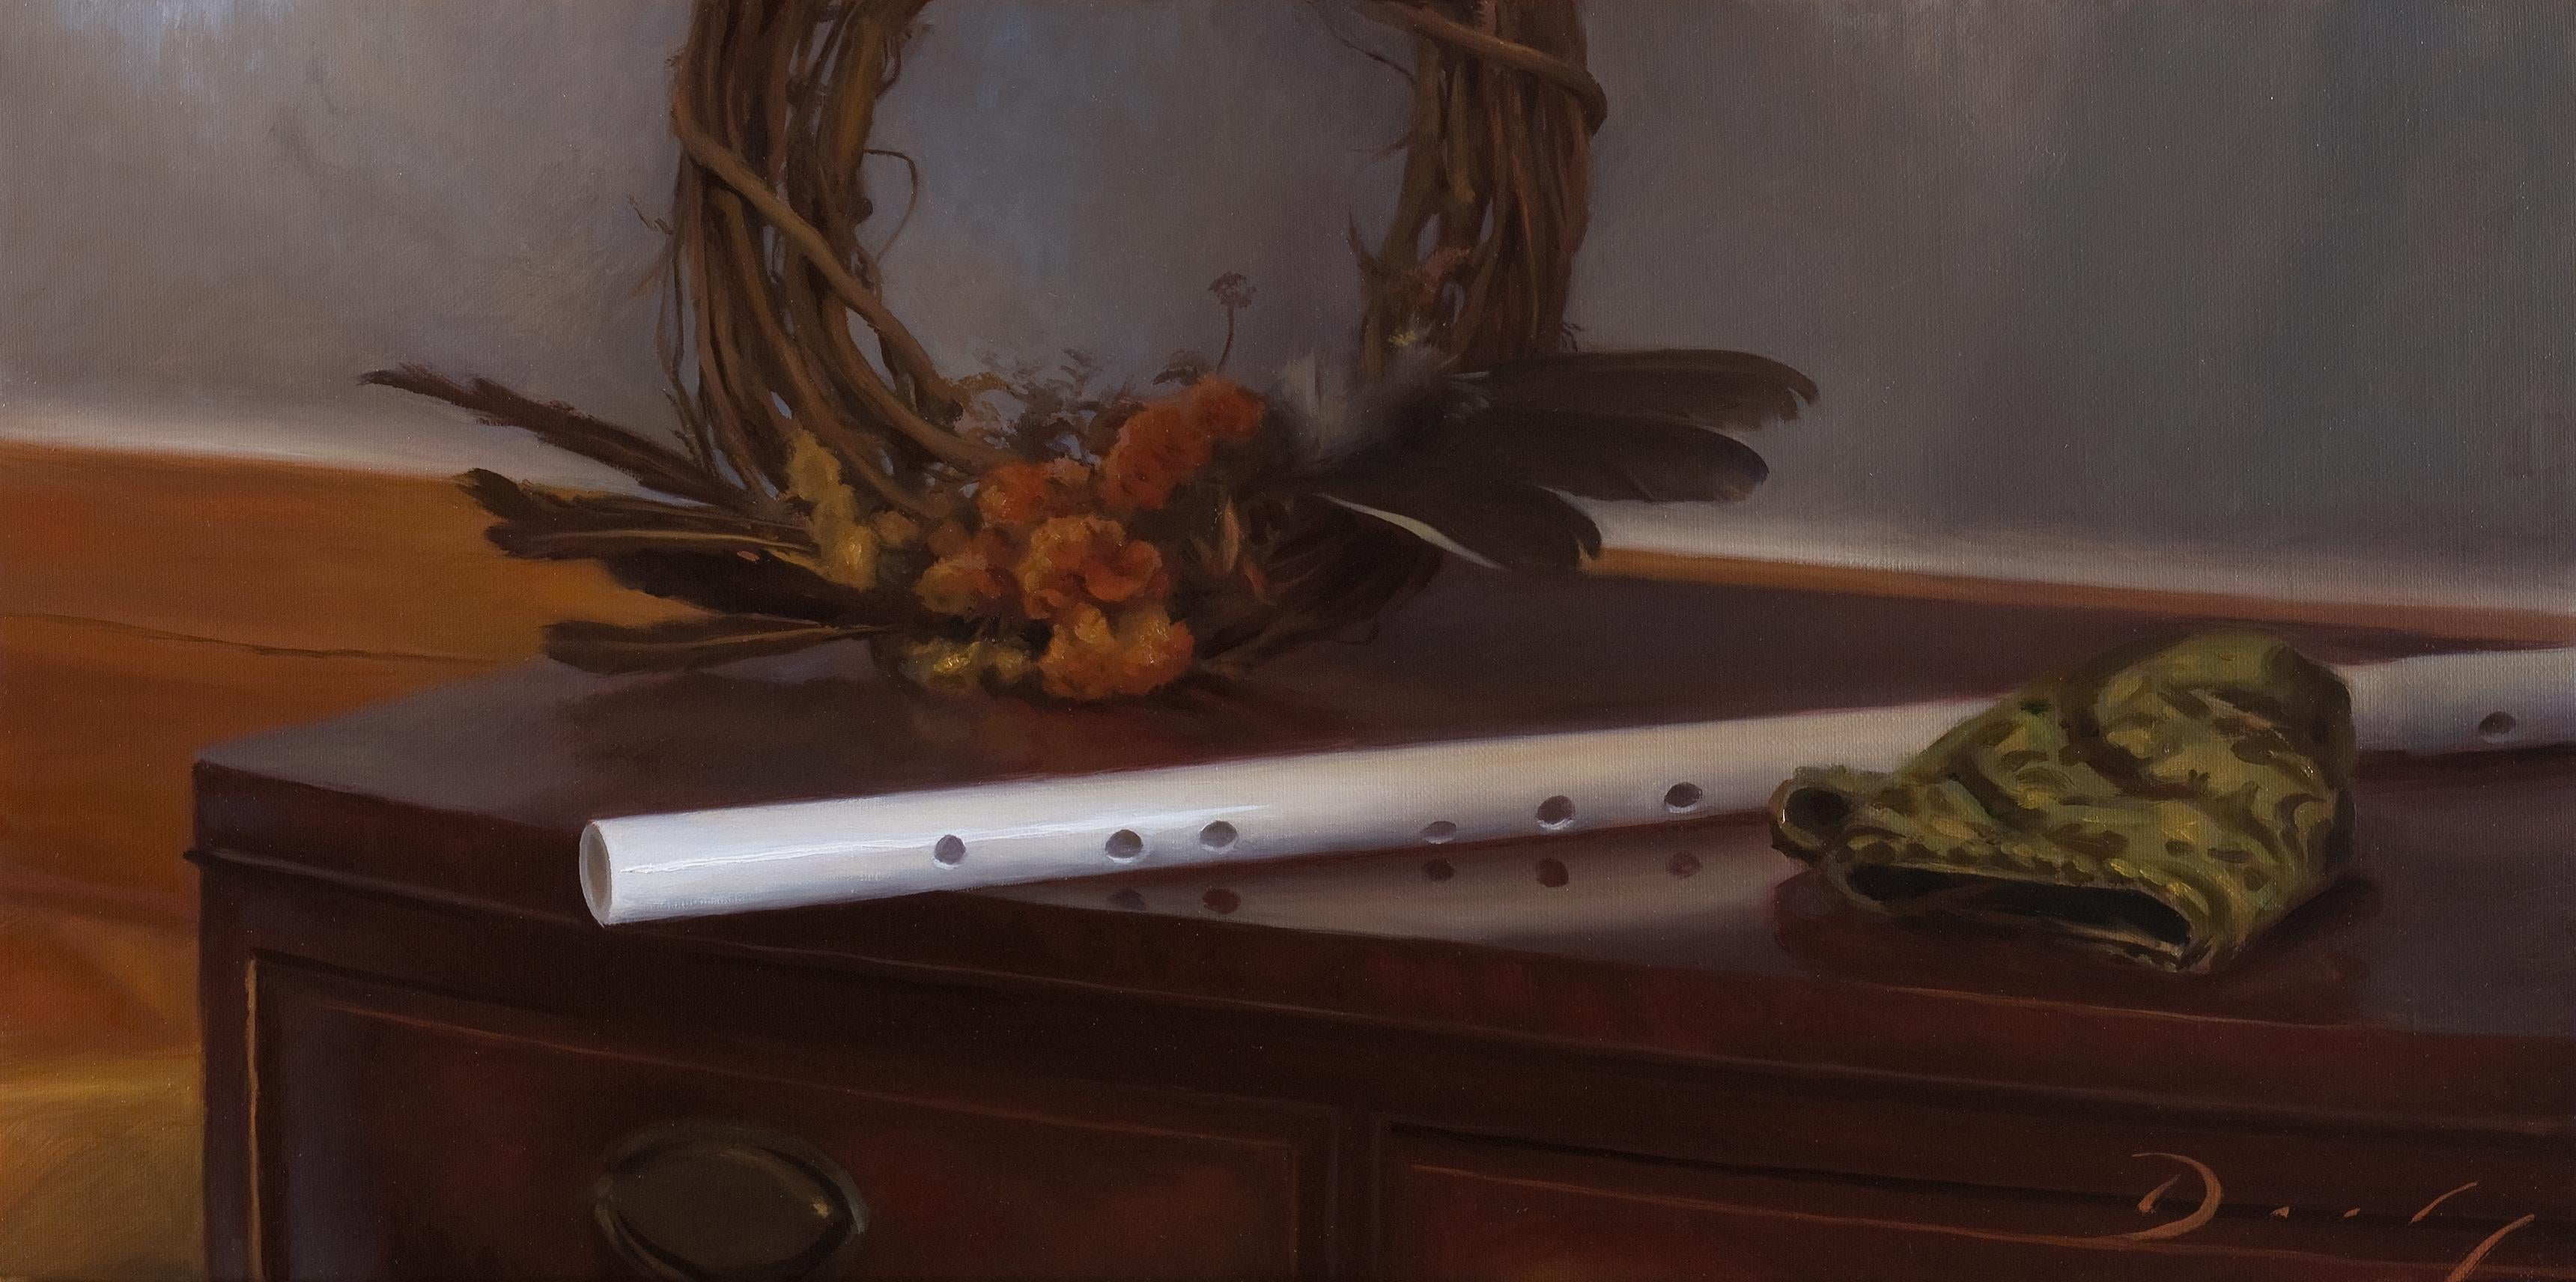 The White Flute is a modern still life by Joseph Daily, in which a white flute is the focal point of the piece. Its reflection can be seen in the polished surface of the mahogany desk. The composition is balanced by the inclusion of a festive